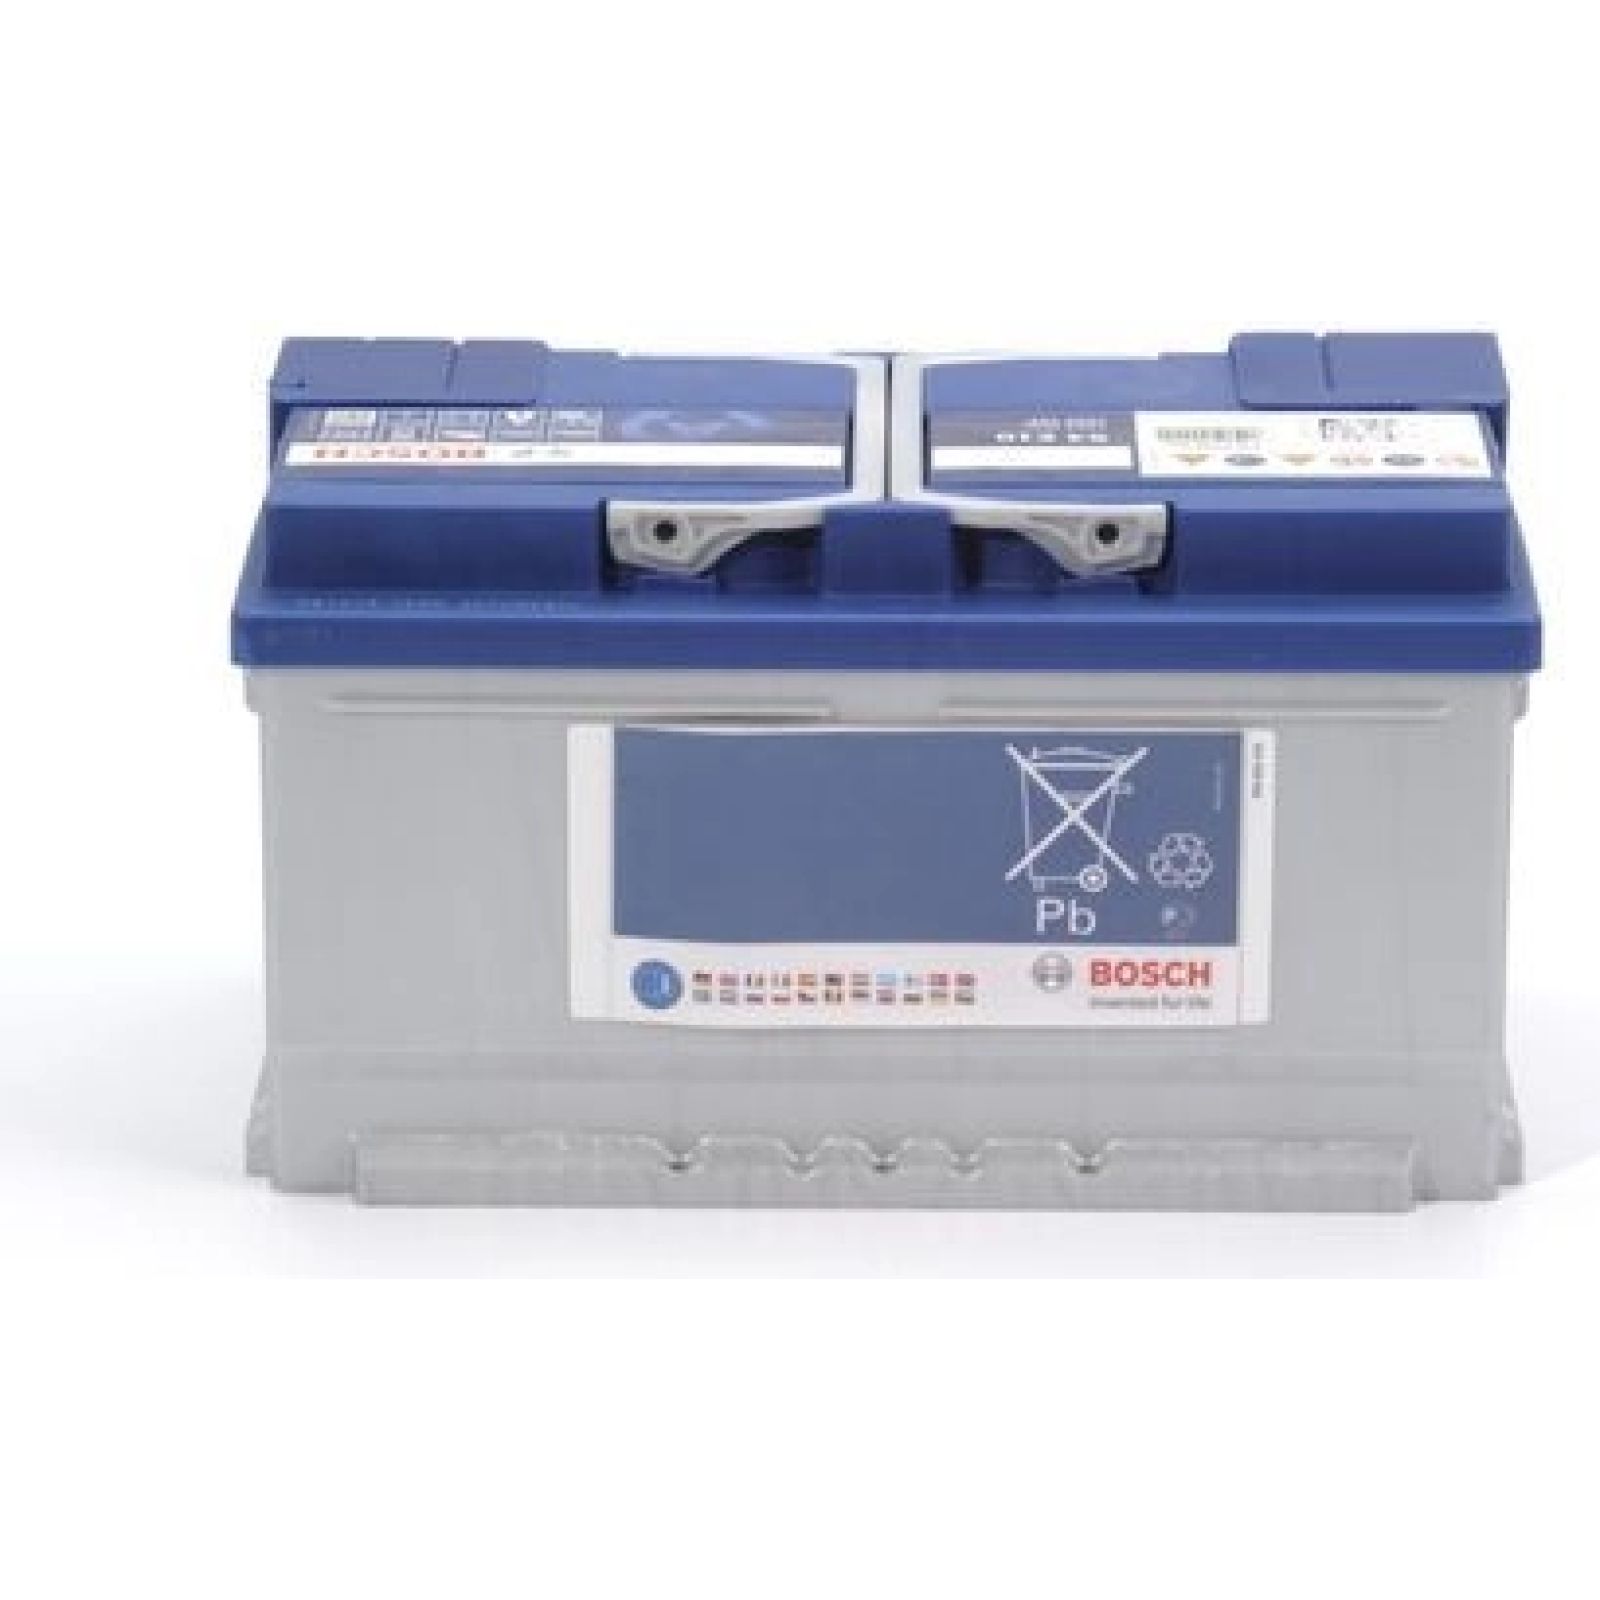 https://www.autoteile-store.at/img/product/s4-e10-bosch-pkw-batterie-efb-12v-75ah-730a-s4e-efb-0-092-s4e-100-62466/6ce665ef80e8862b41bdd9f34a904a63_1600.jpg